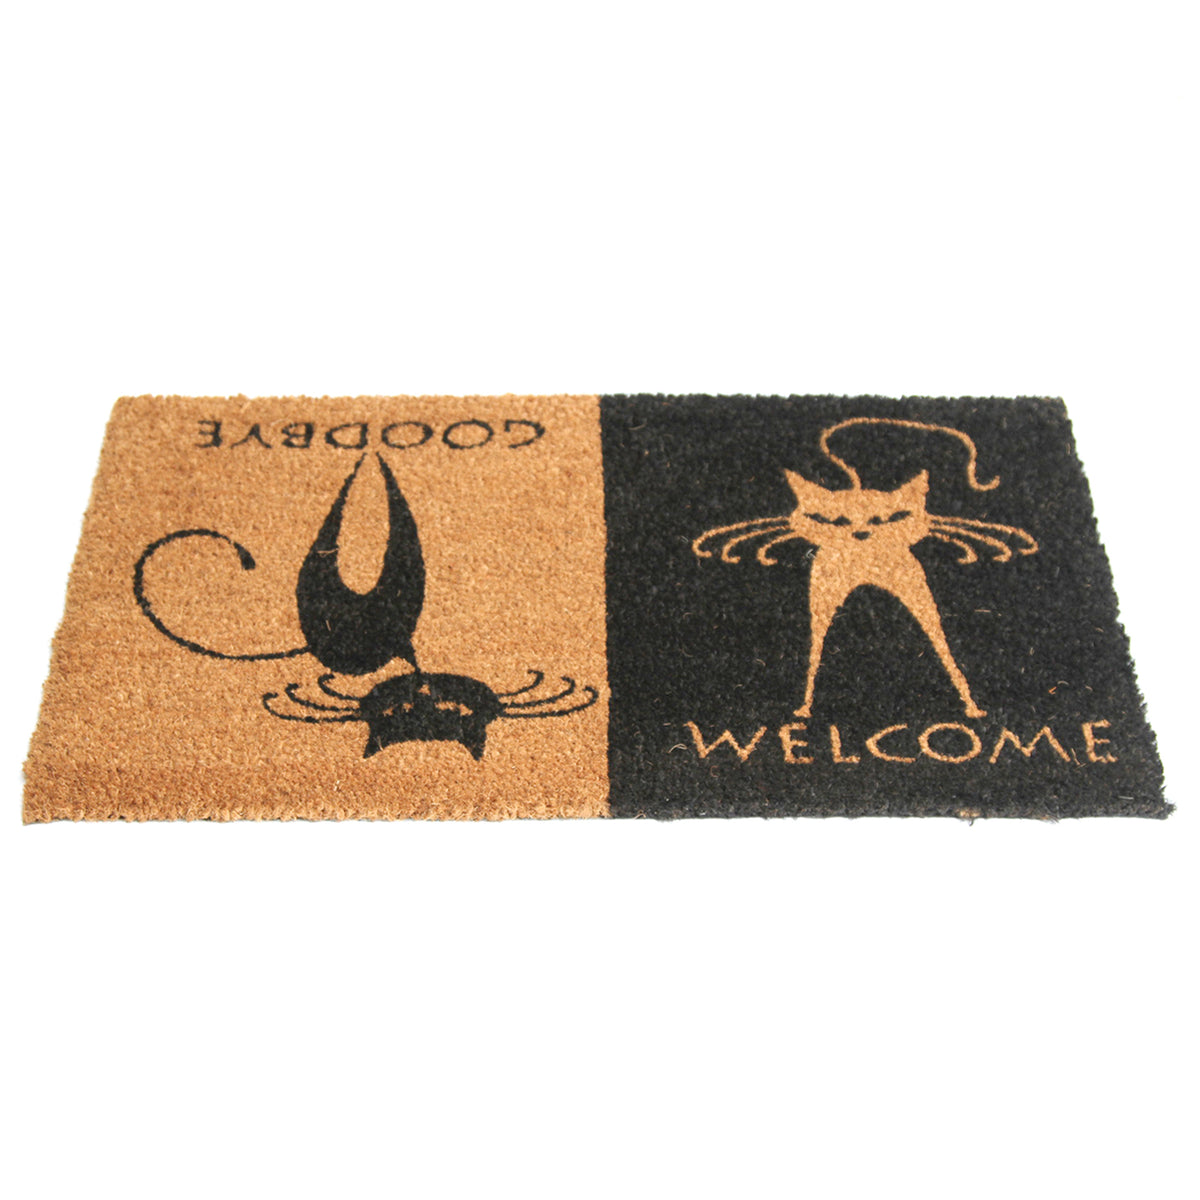 Brown and Black Colour "Welcome Goodbye" and Cat Printed Natural Coir Door Mat - OnlyMat